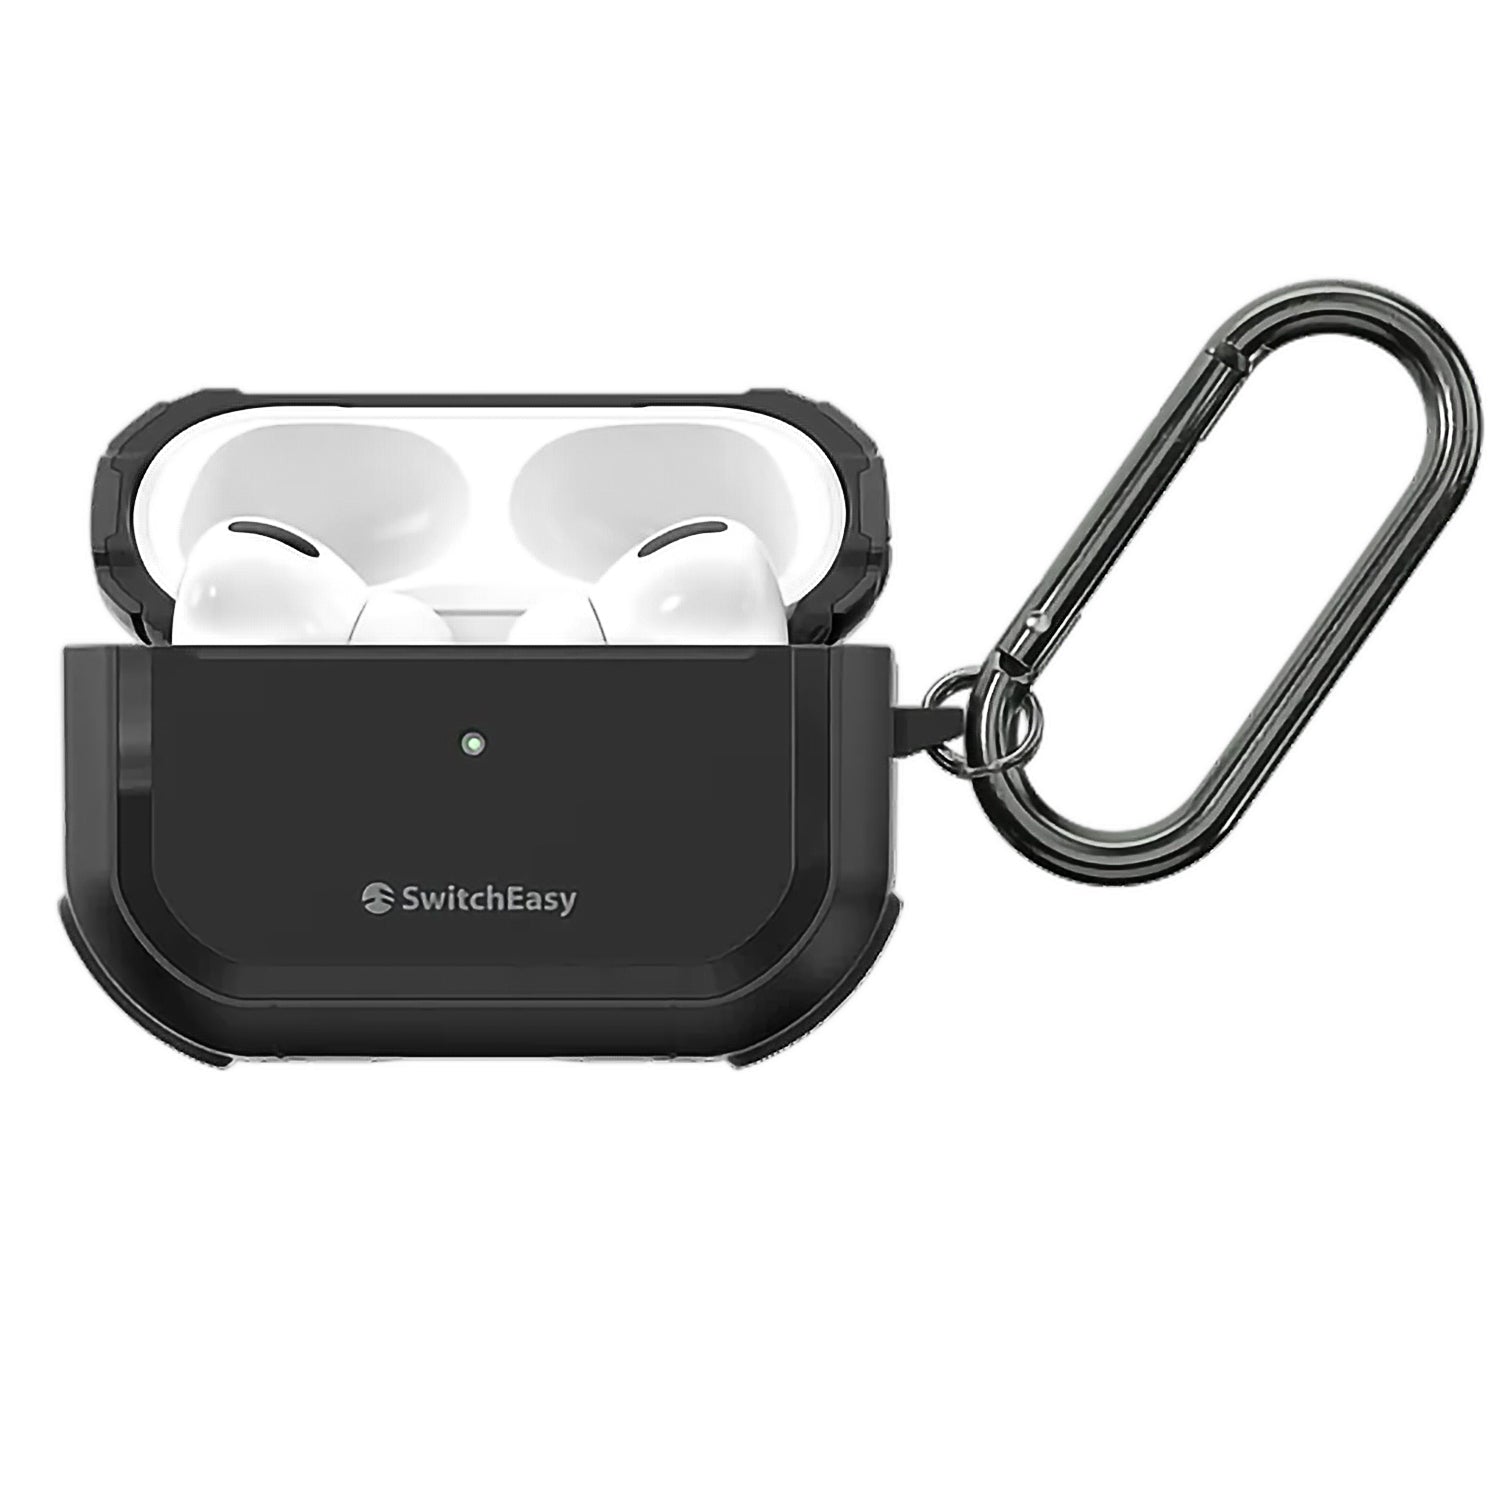 SwitchEasy Defender Rugged Utility Protective Case for AirPods Pro 1& 2 AirPods Case SwitchEasy Black 